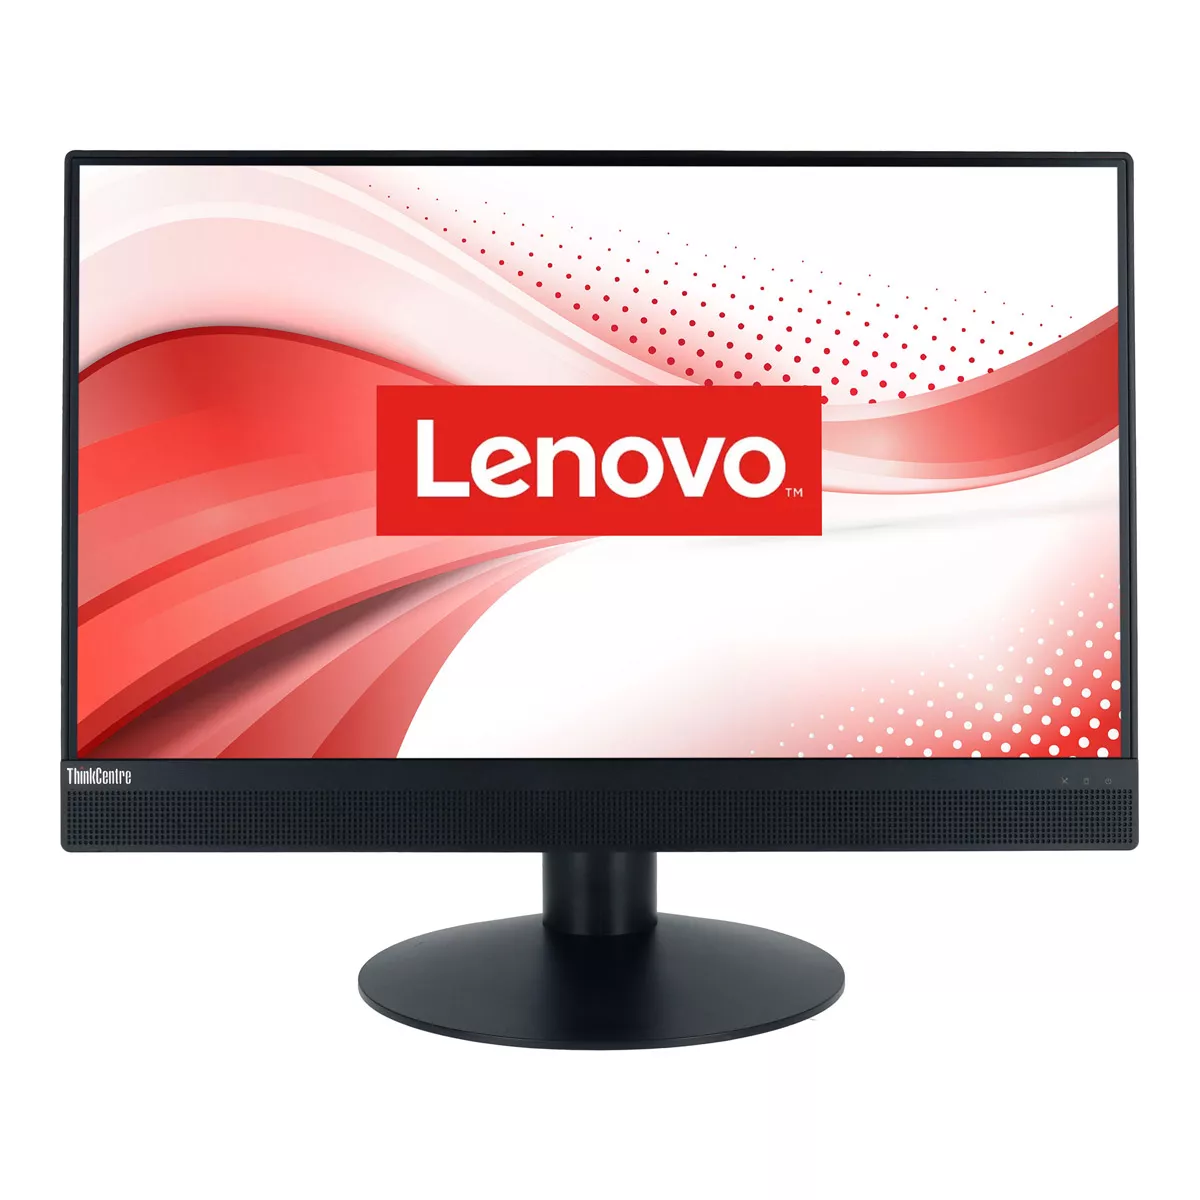 All-in-One Lenovo M820z Pentium Gold G5400 21,5 Zoll 1920x1080 8 GB DDR4 240 GB SSD A+